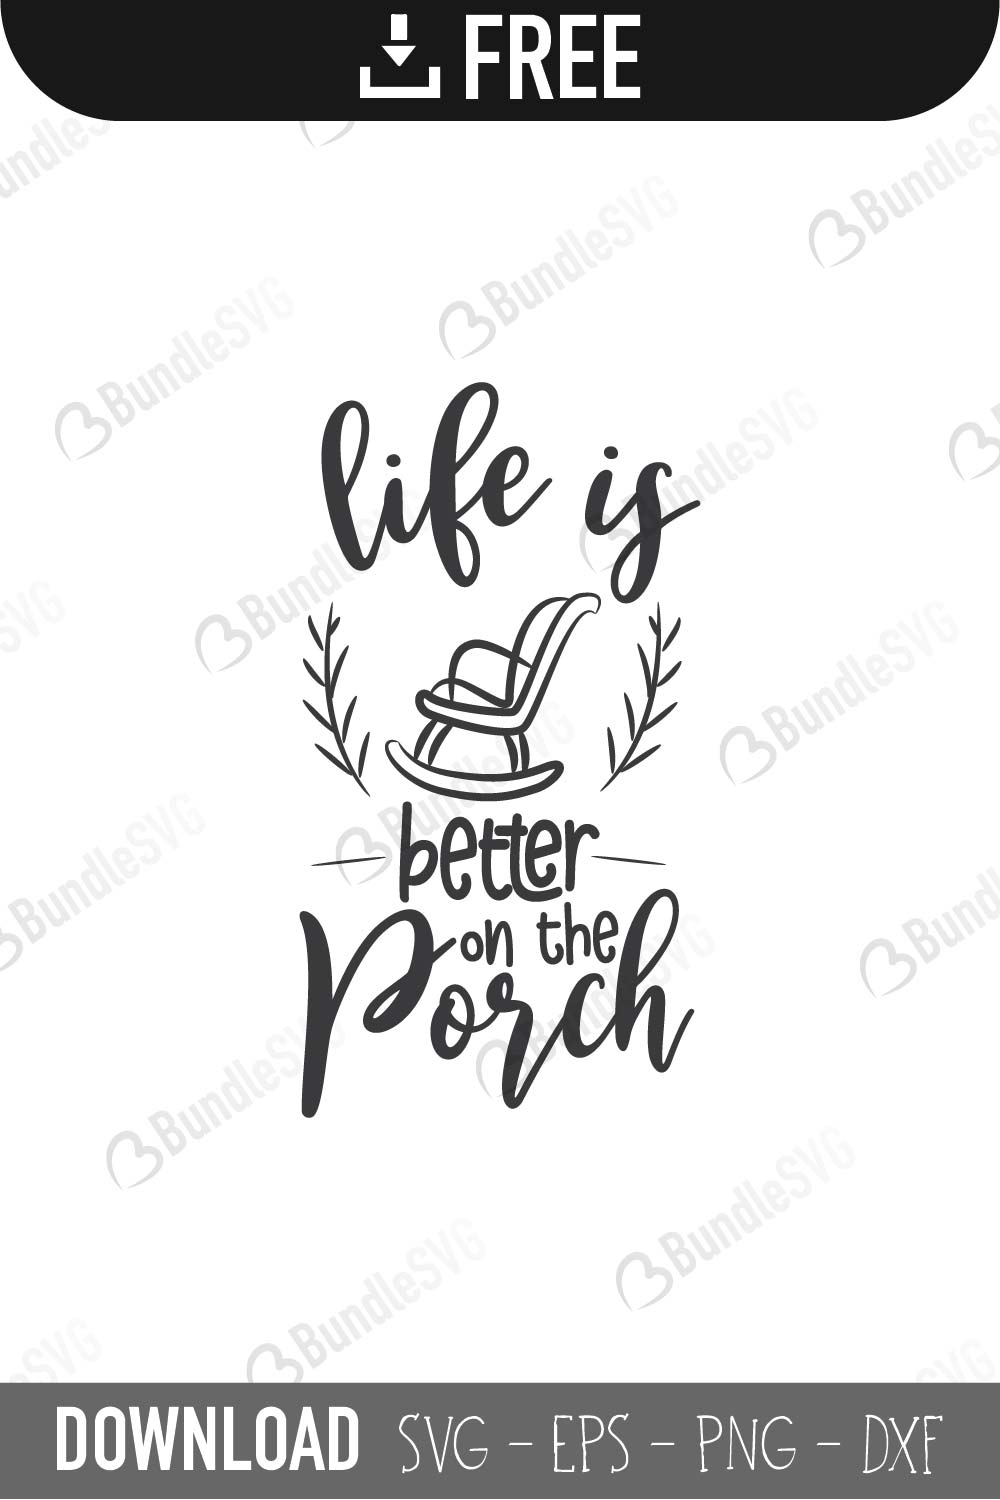 Download Porch Quote Svg Dxf Porch Saying Svg Porch Wood Sign Svg Porch Sign Svg Cut File Life Is Better On The Porch Svg Dxf Cutting File Visual Arts Collage Deshpandefoundationindia Org